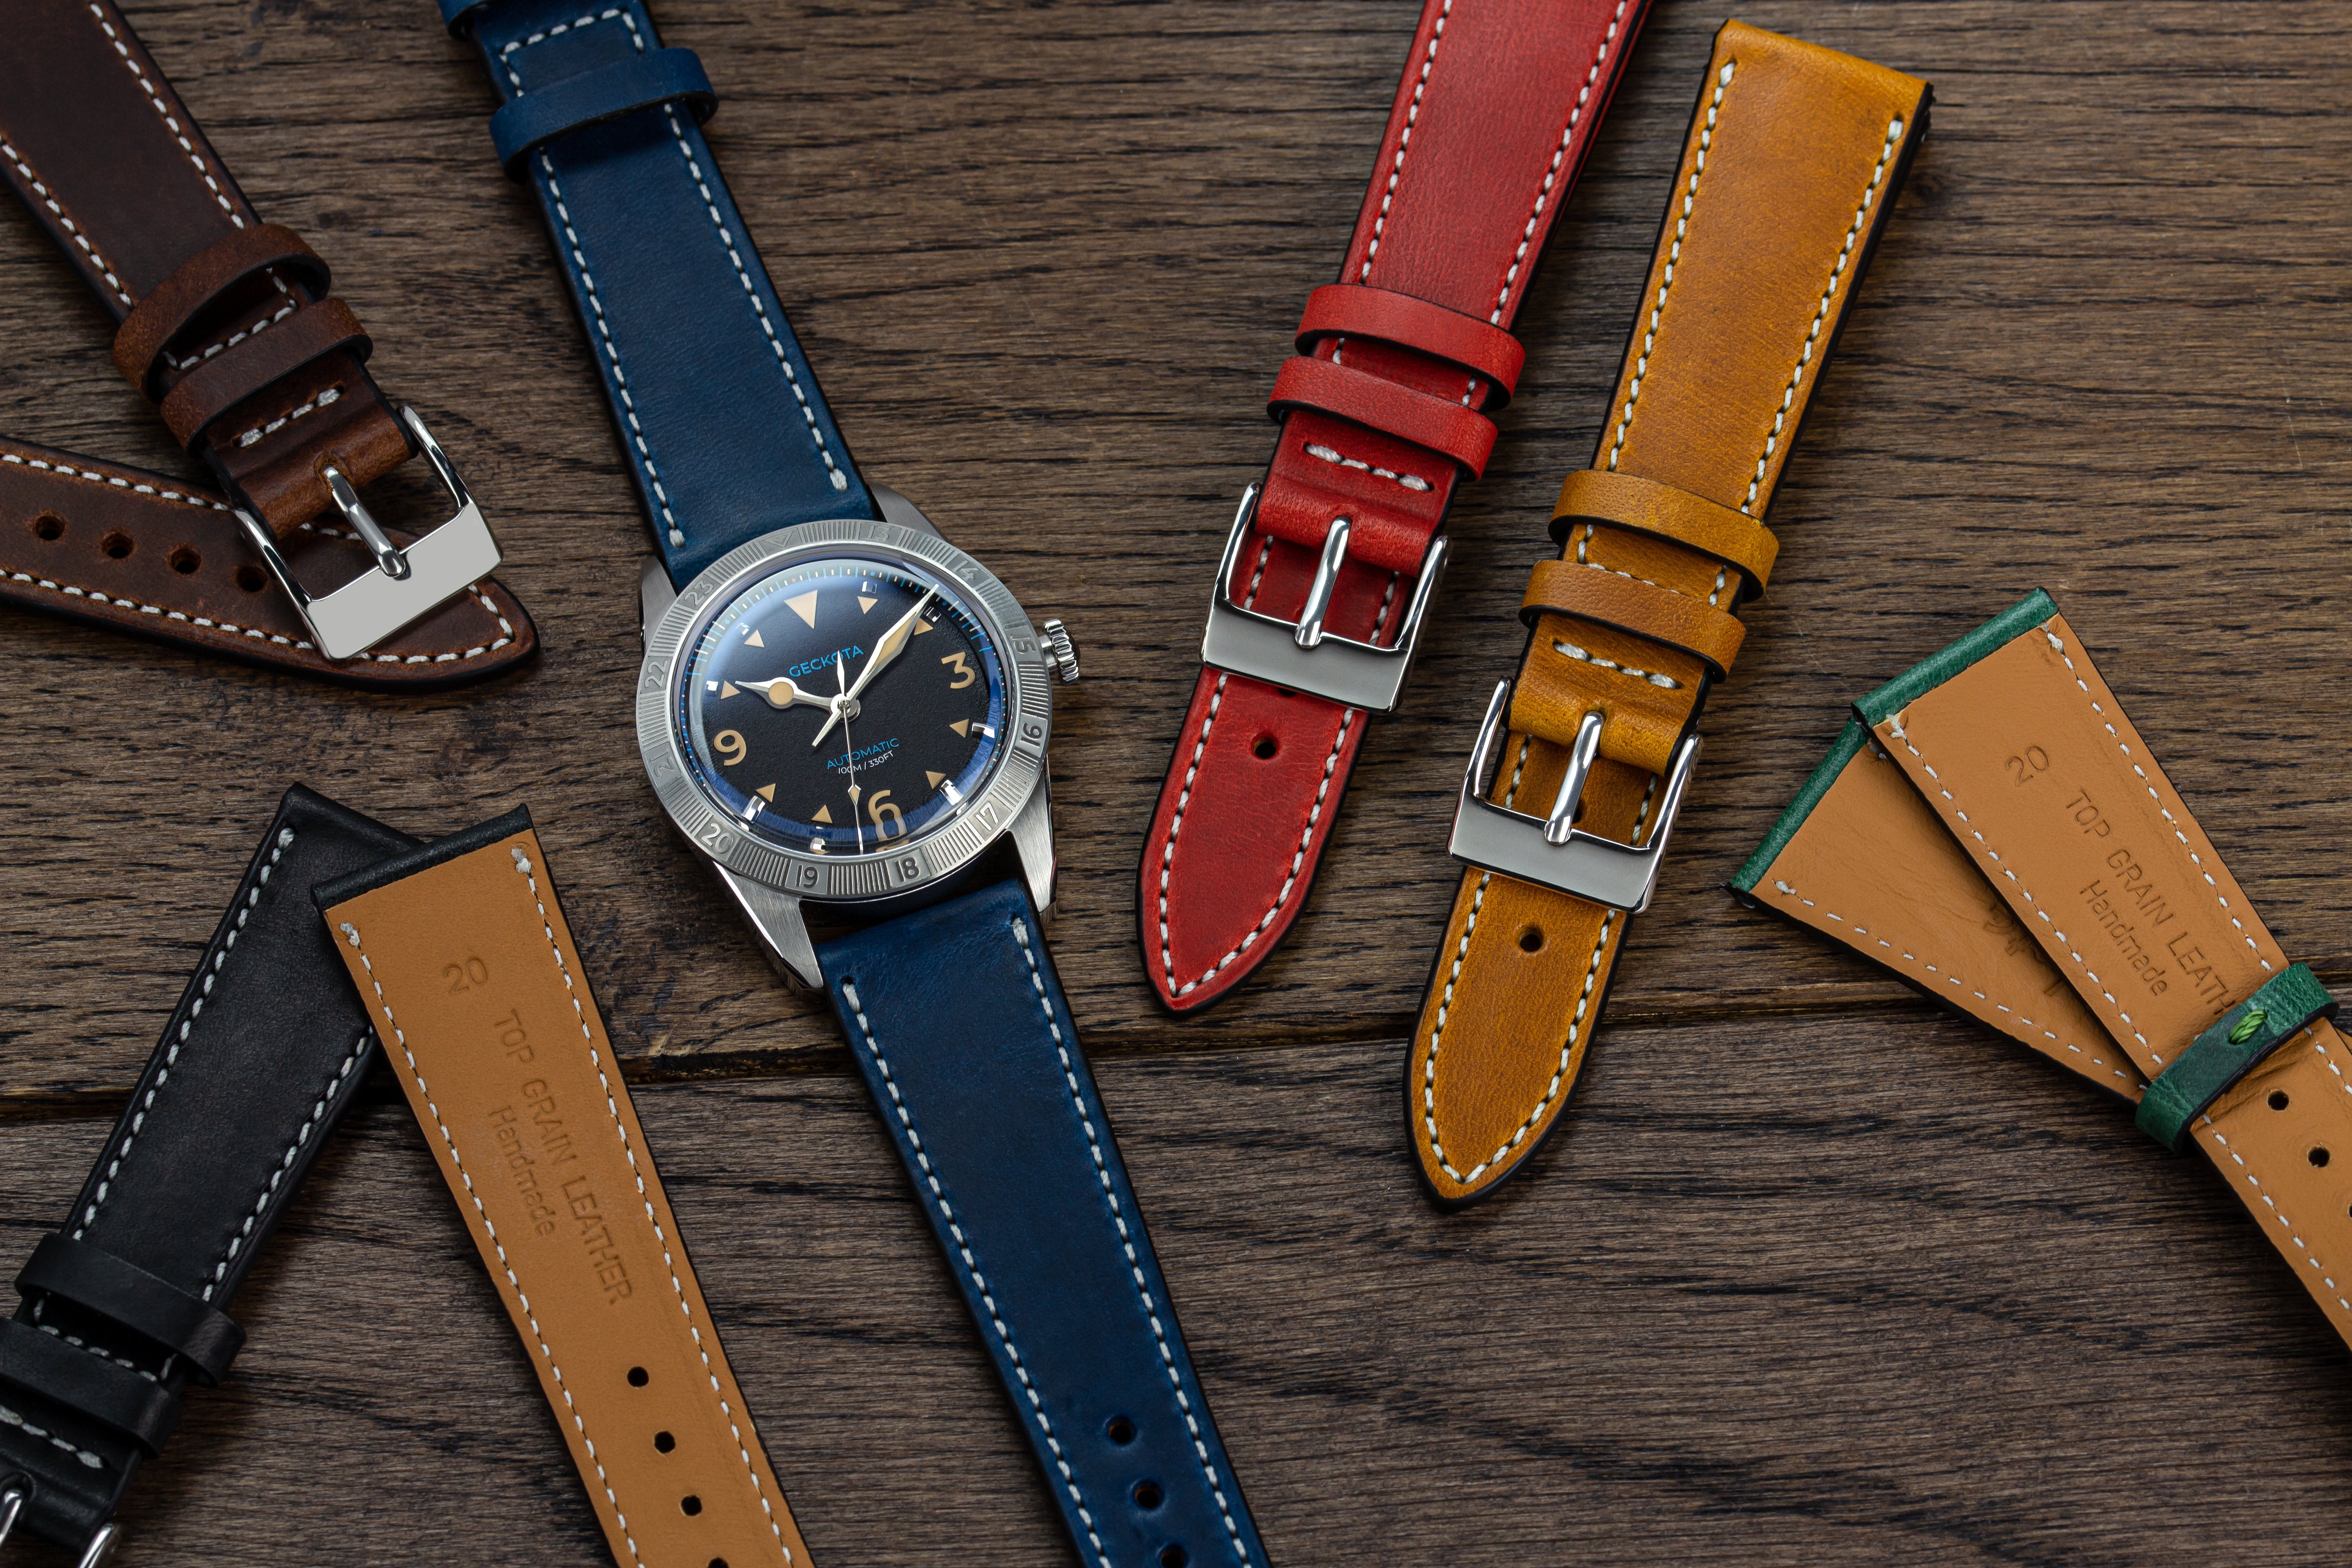 Our recommended watch straps and pairing suggestions - Geckota